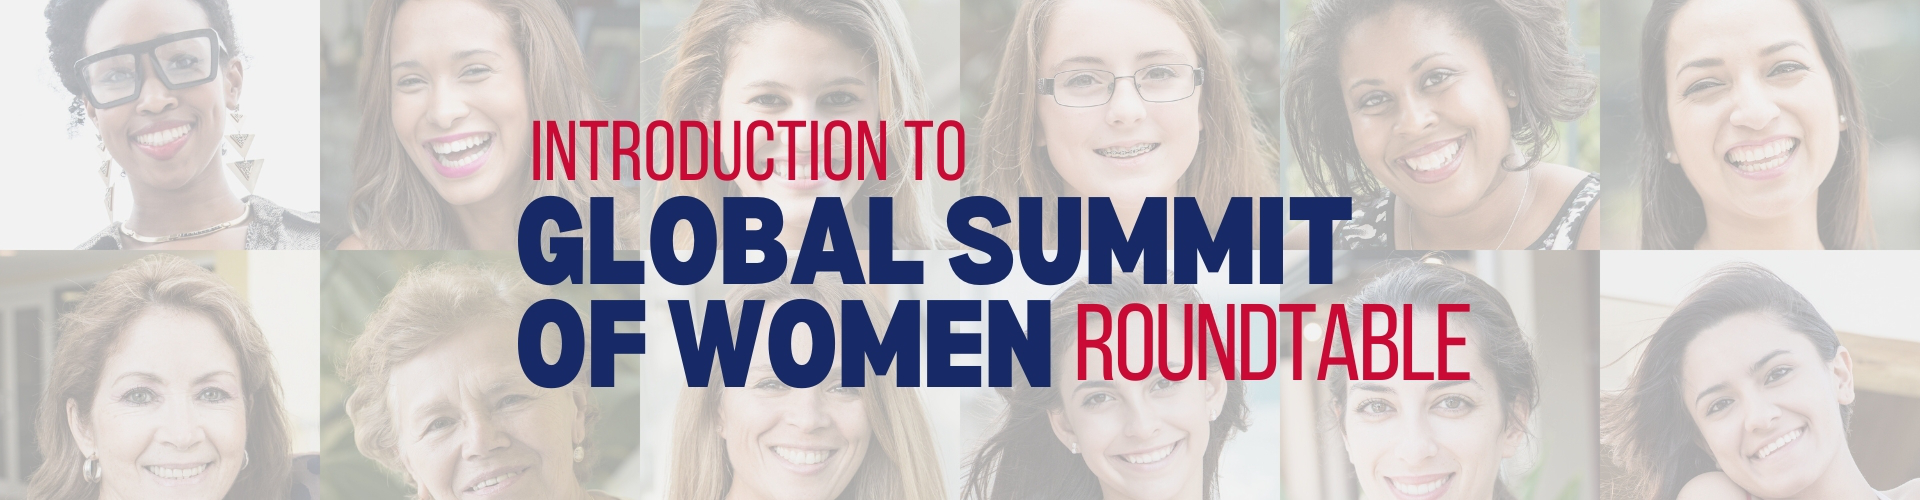 thumbnails Introduction to Global Summit of Women Roundtable